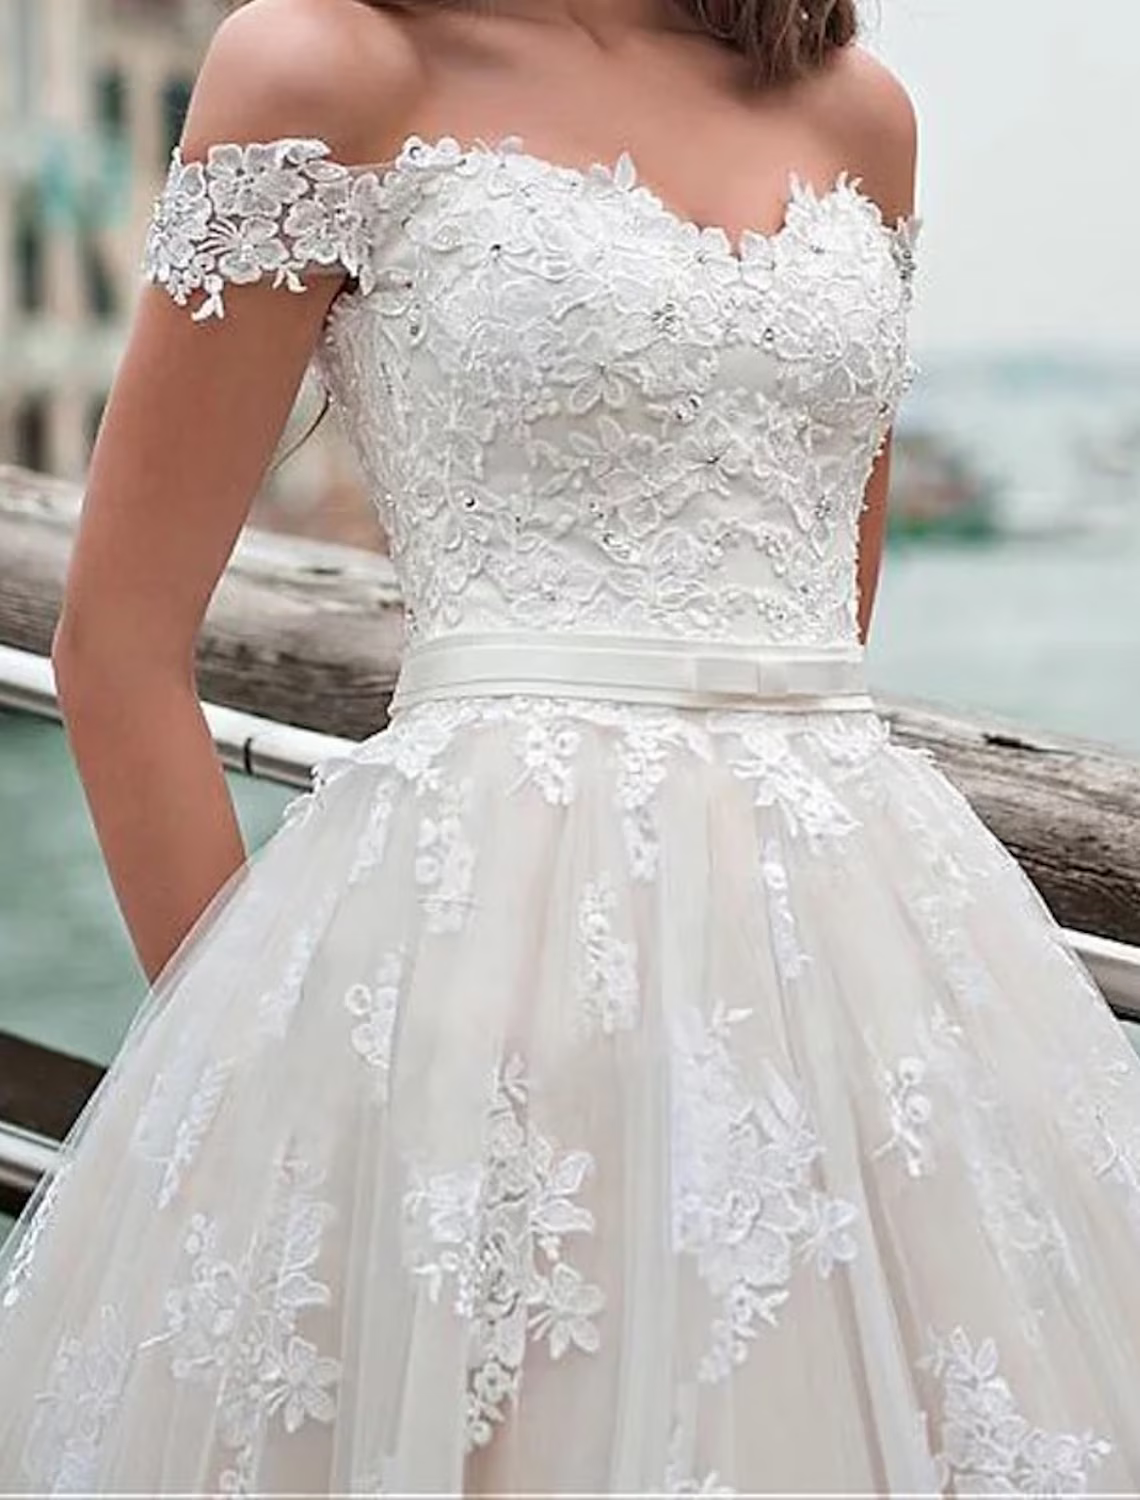 Engagement Formal Wedding Dresses Chapel Train Ball Gown Short Sleeve Off Shoulder Lace With Appliques